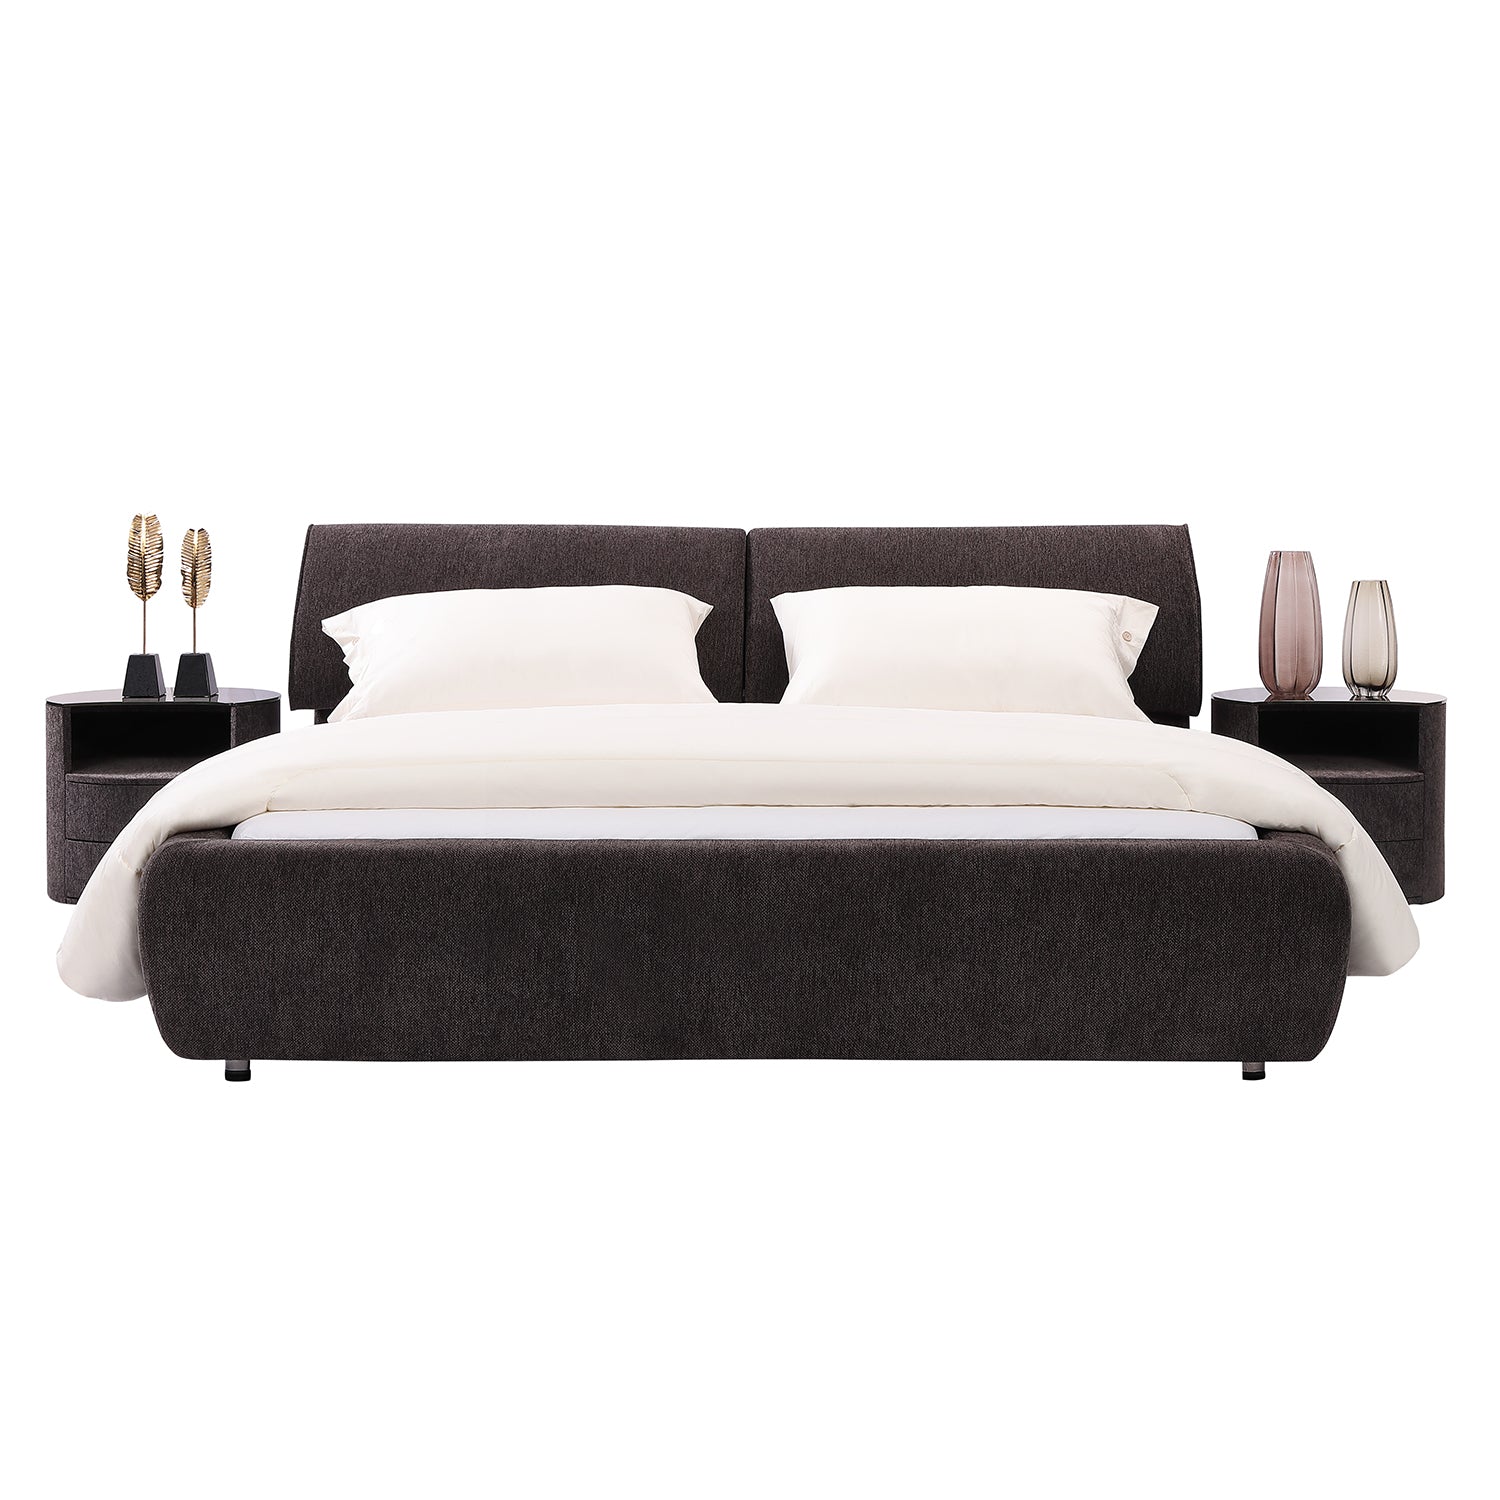 DeRUCCI Bed Frame BZZ4 - 117 with dark fabric frame and soft cushion headboard, adorned with white bedding and flanked by black nightstands with modern lamps.